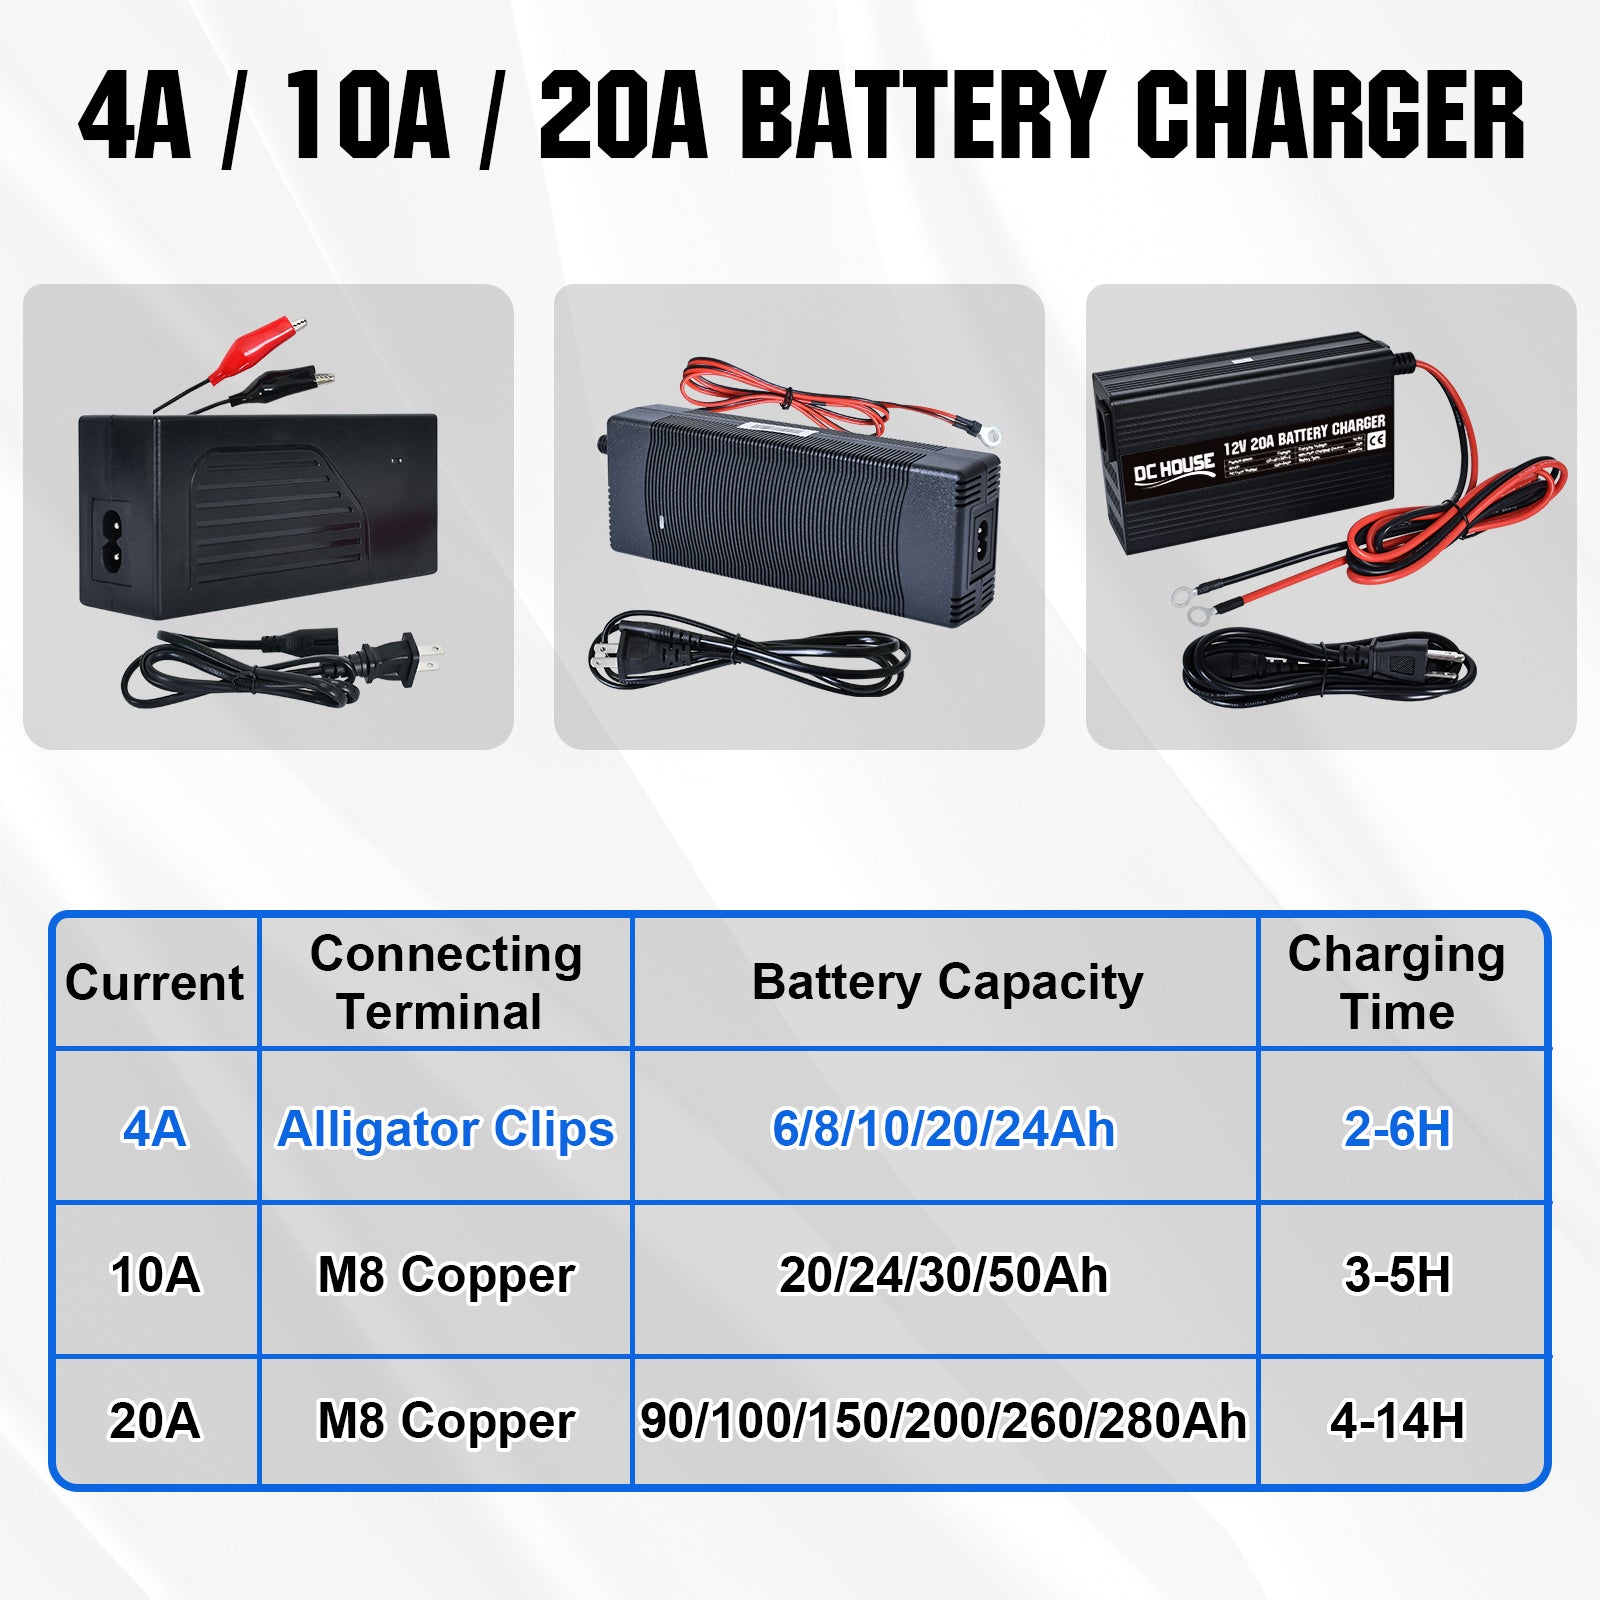 dchouse_12V_4A_LiFePO4_portable_battery_charger_2